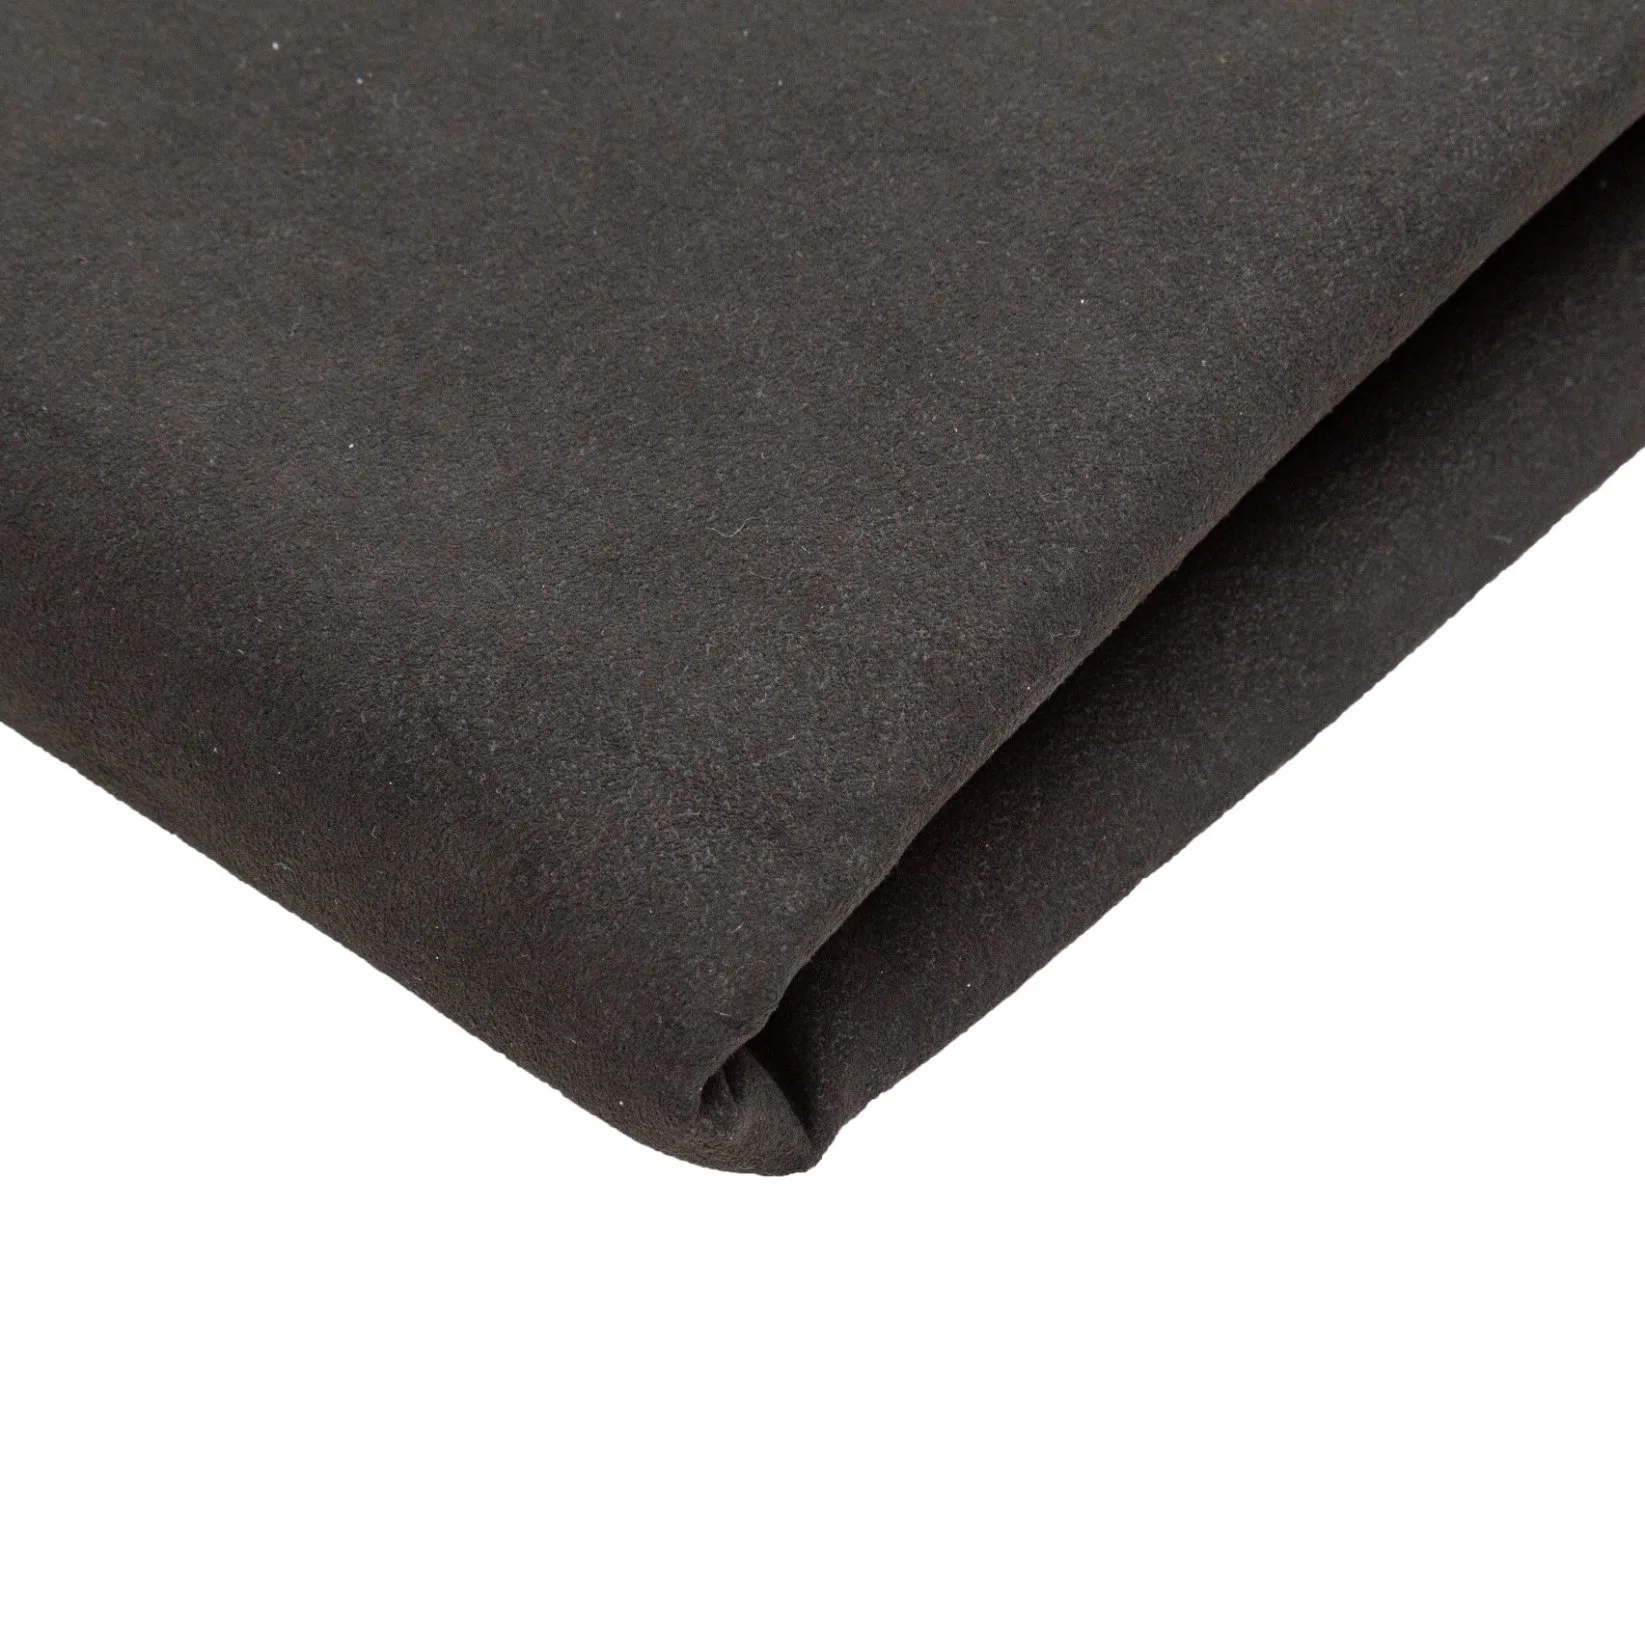 0.6mm Nonwoven Synthetic Microfiber Suede Leather for Shoes